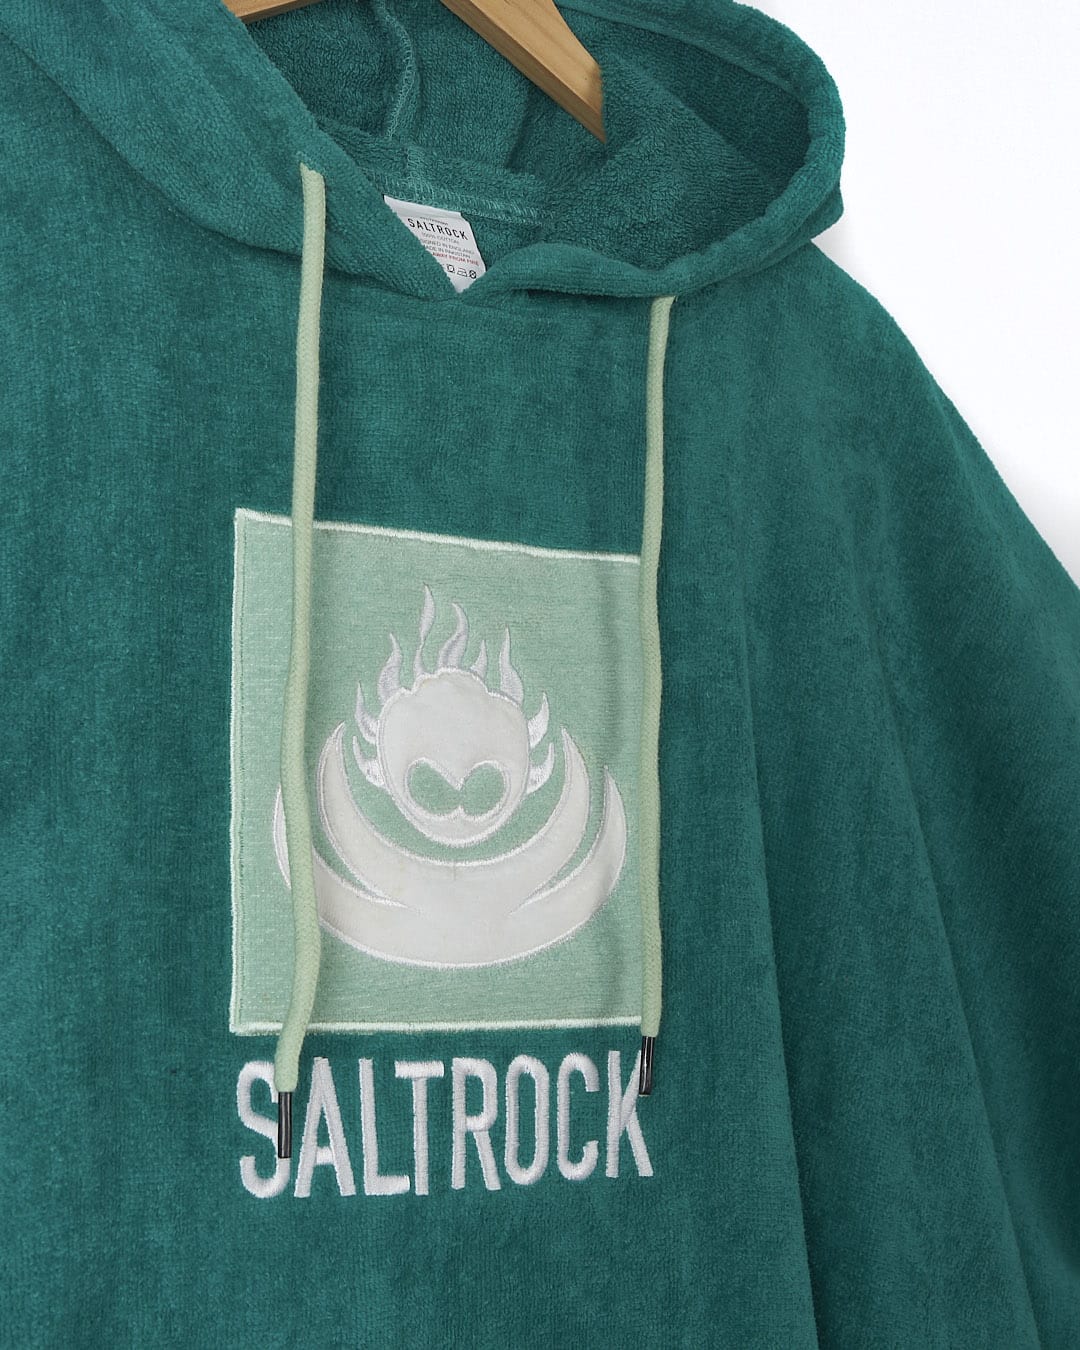 A green Corp Changing Towel - Turqouise with the word Saltrock on it.